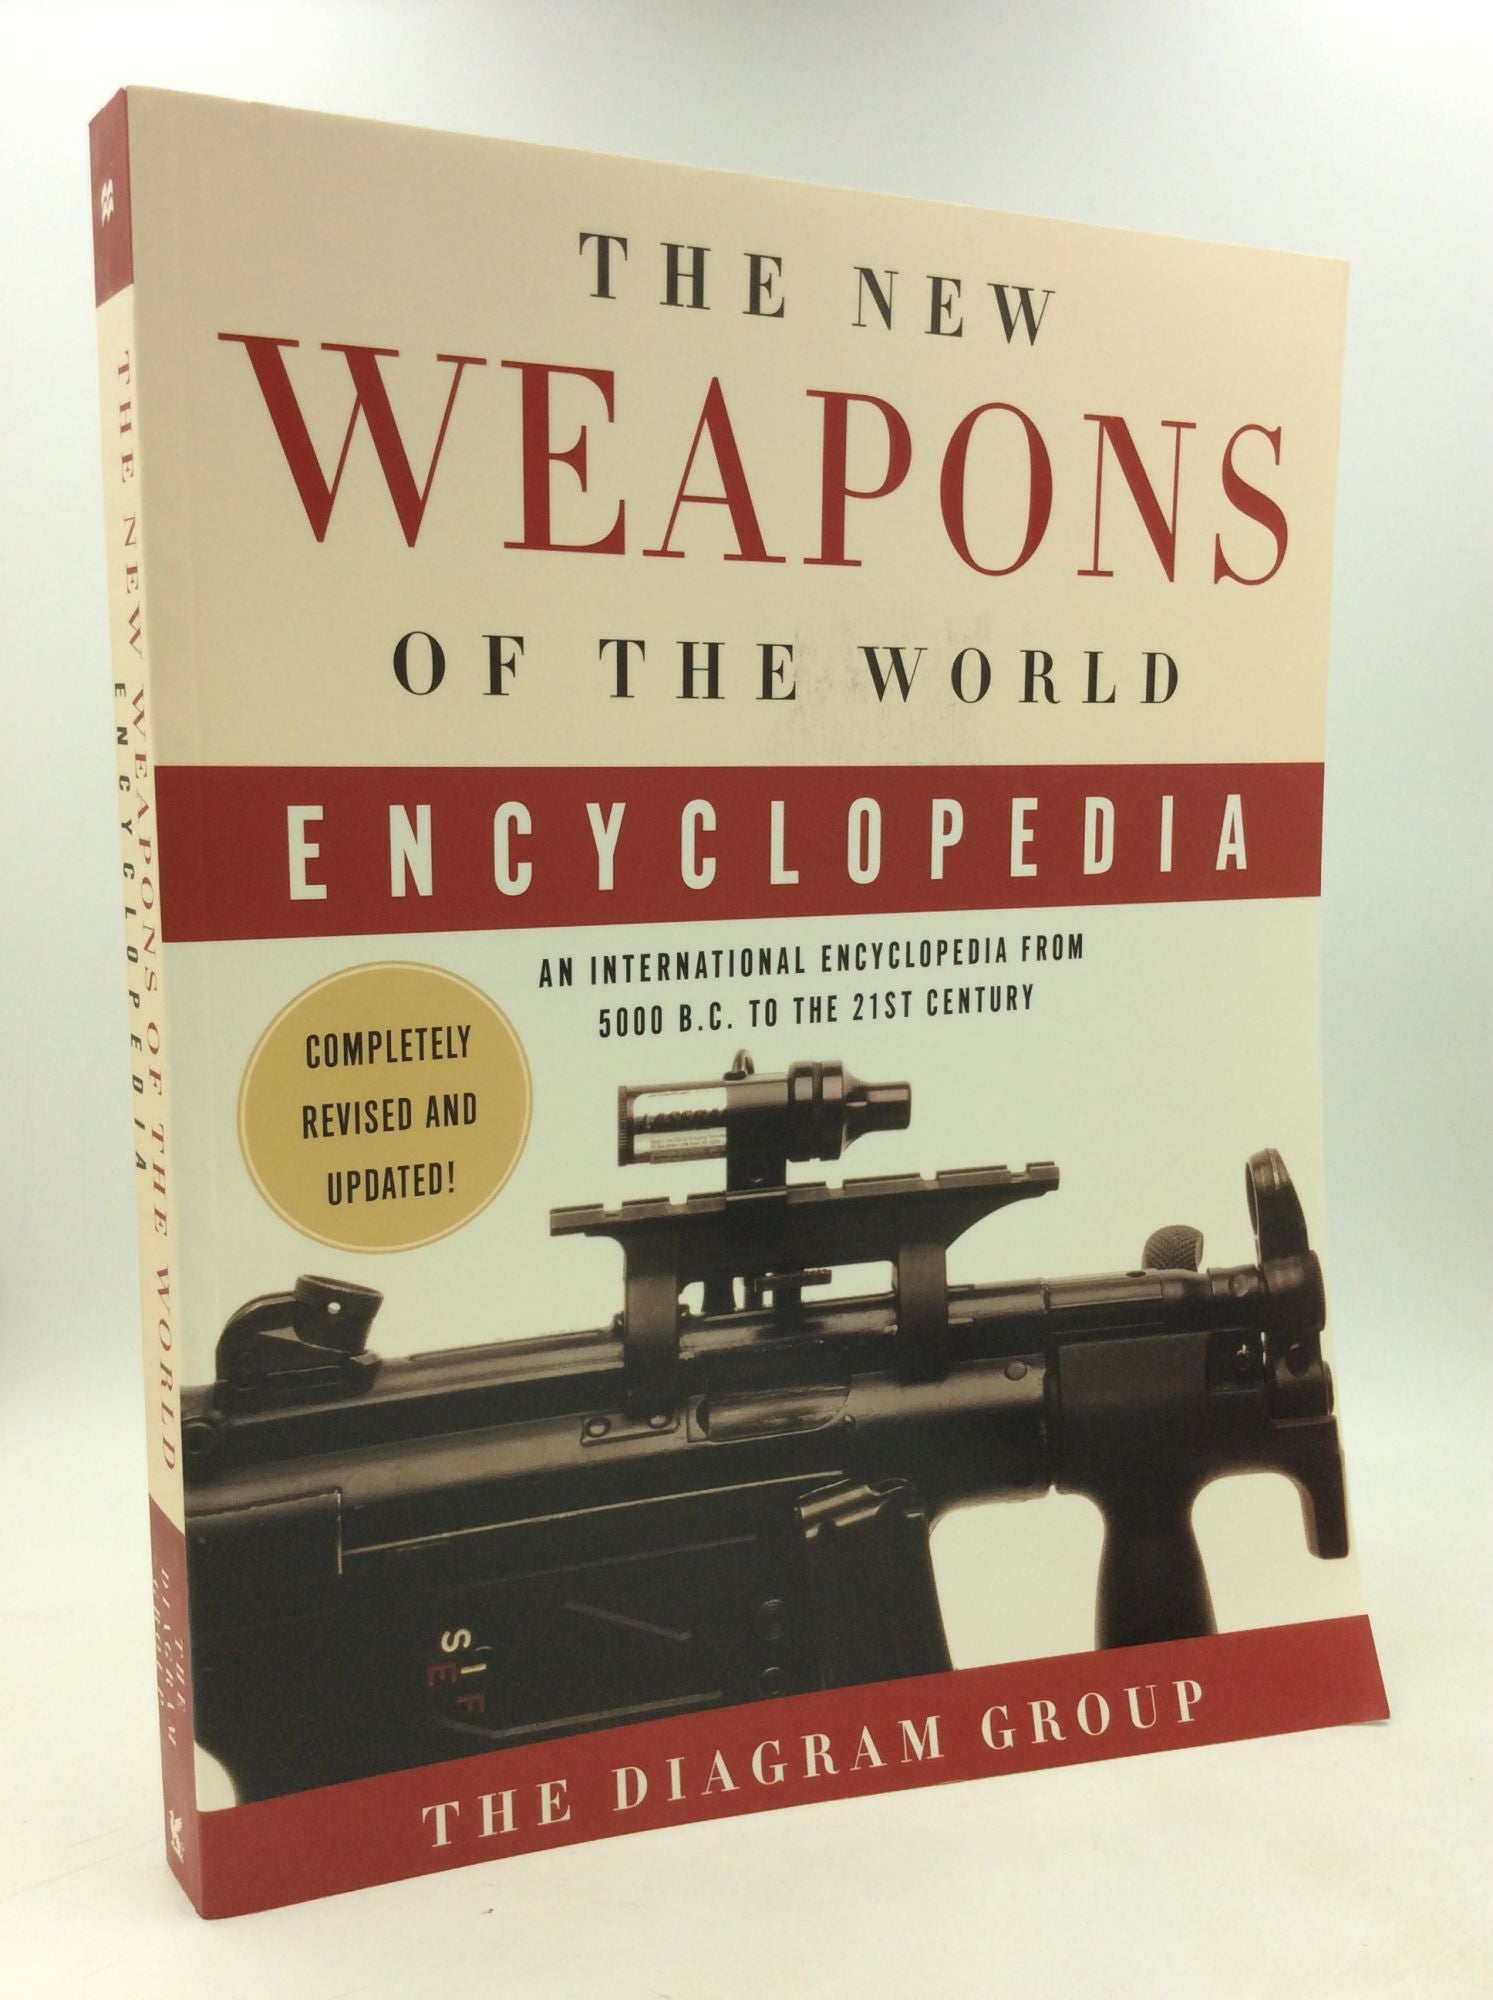 The Diagram Group - The New Weapons of the World Encyclopedia: An International Encyclopedia from 5000 B.C. To the 21st Century